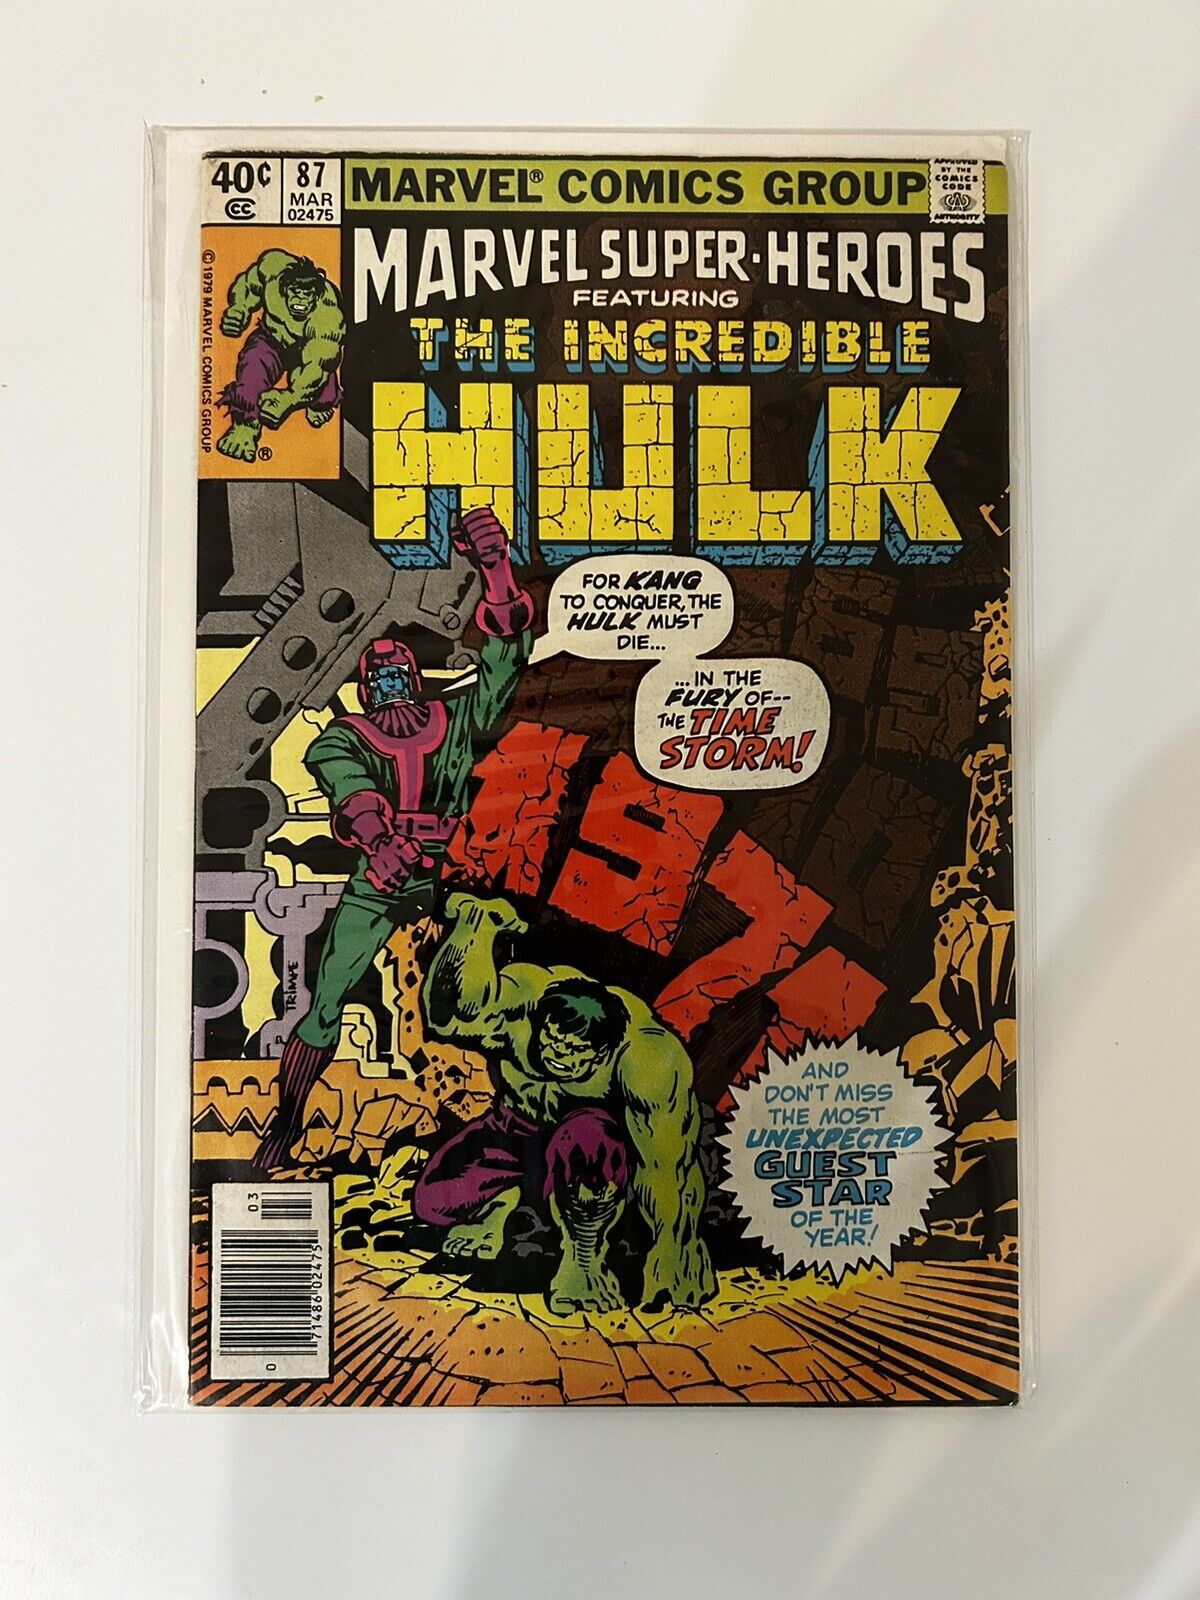 Marvel Super-Heroes #87 (Marvel, 1979) Featuring The Incredible Hulk. 